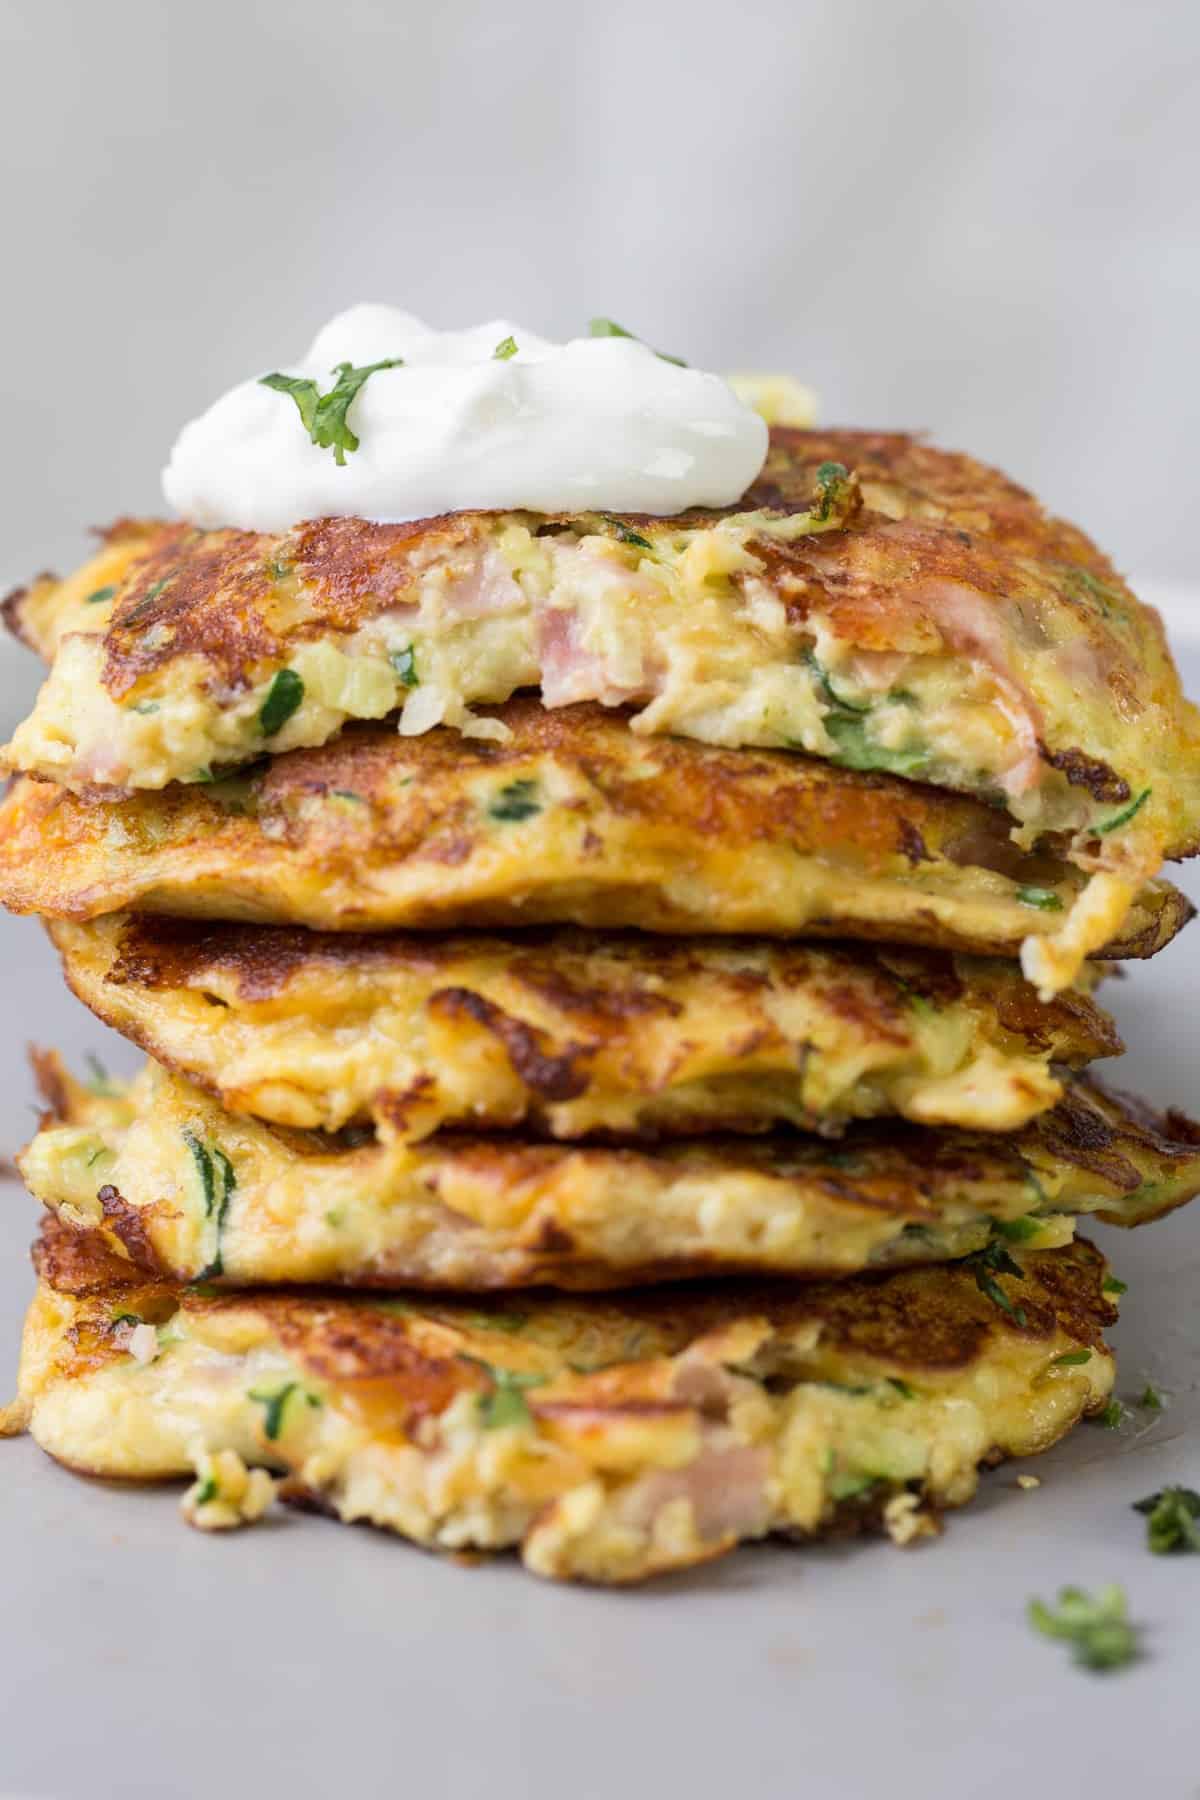 Zucchini fritter stacked on top of each other with a dallop of sour cream on top.